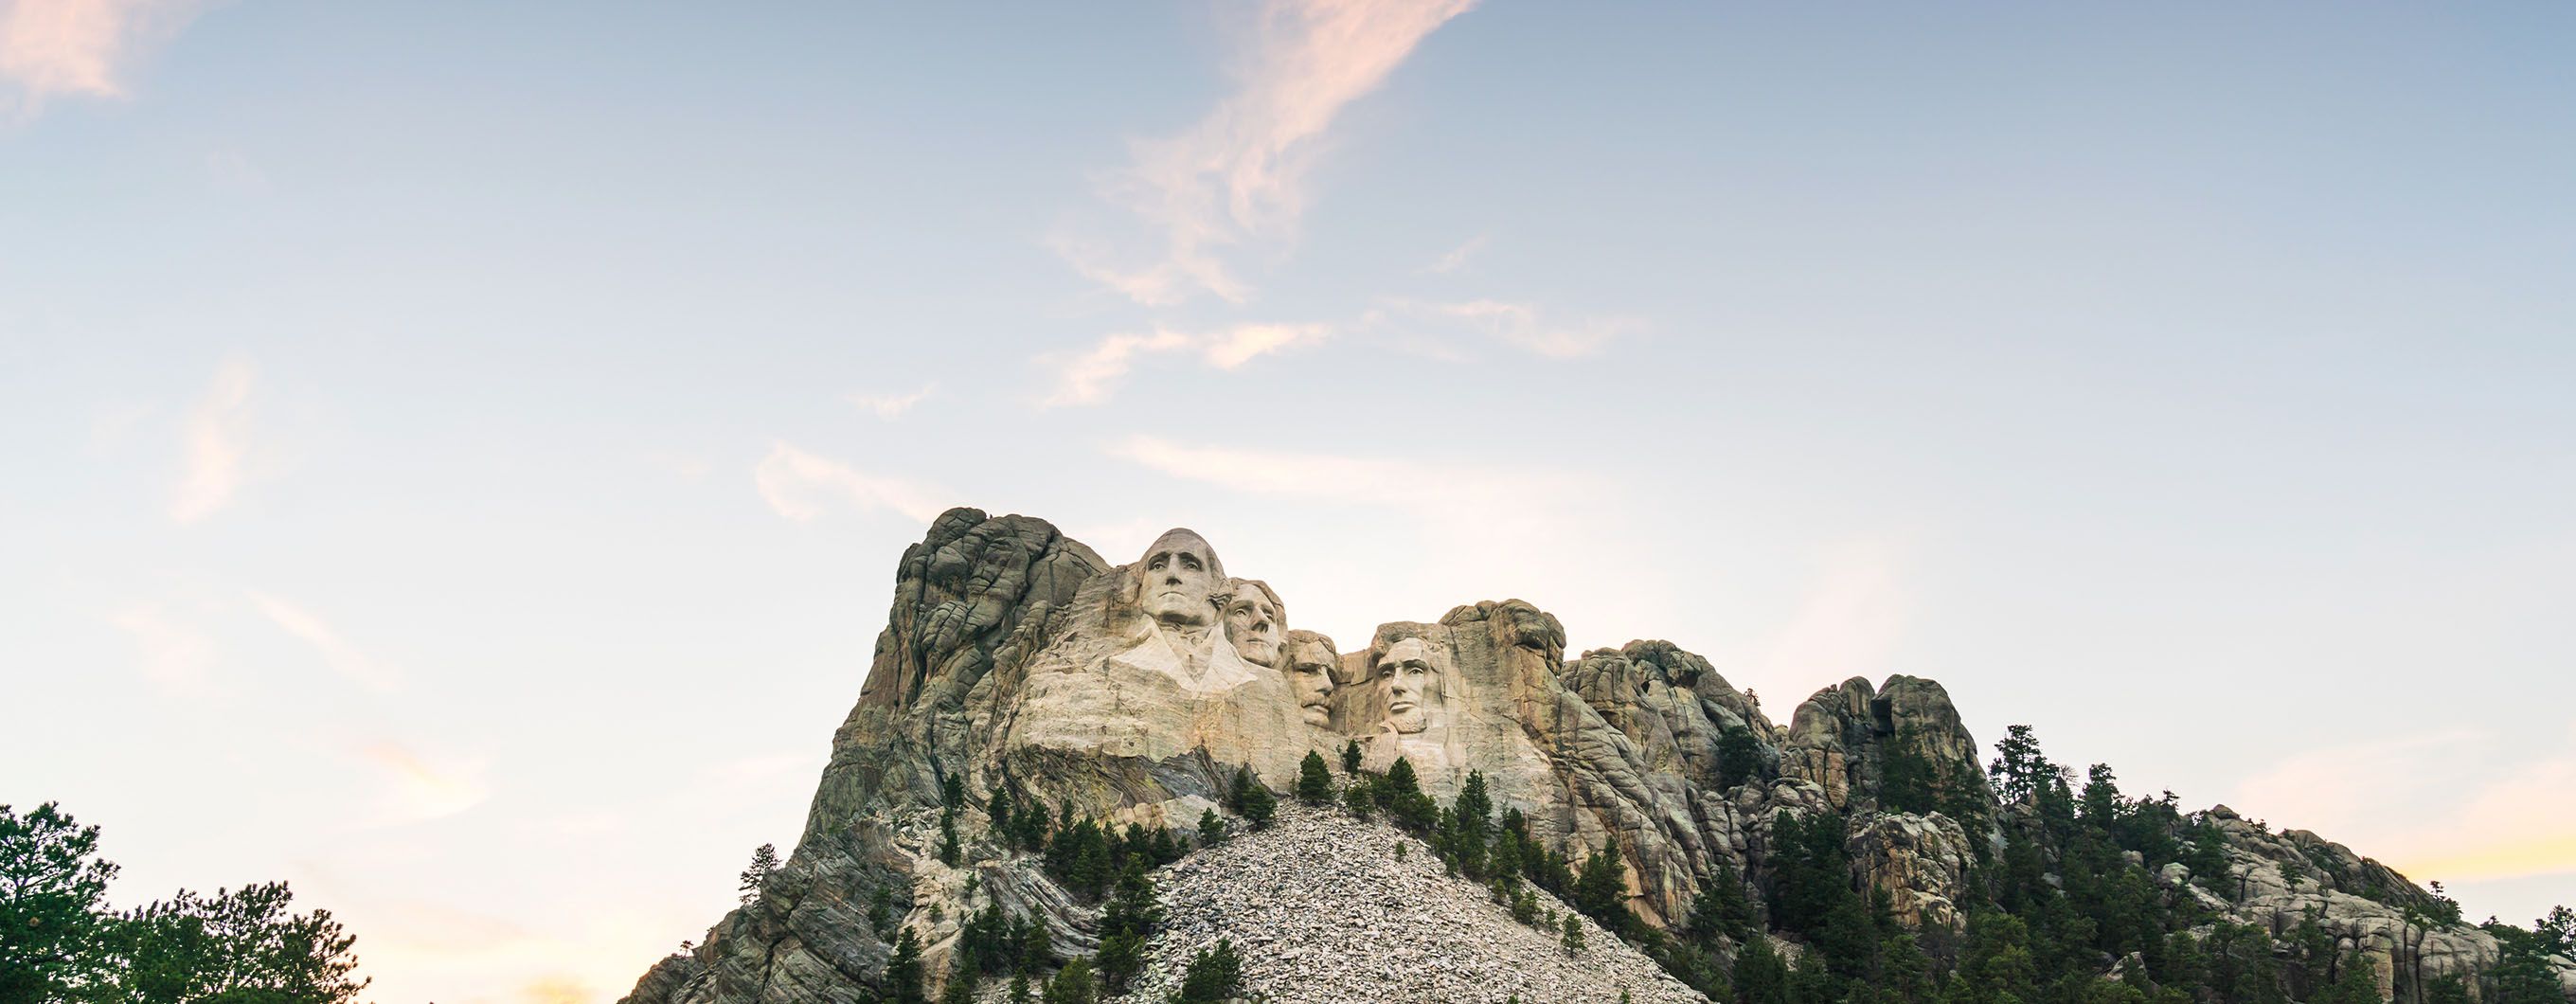 Image of Mount Rushmore with a light blue sky behind it